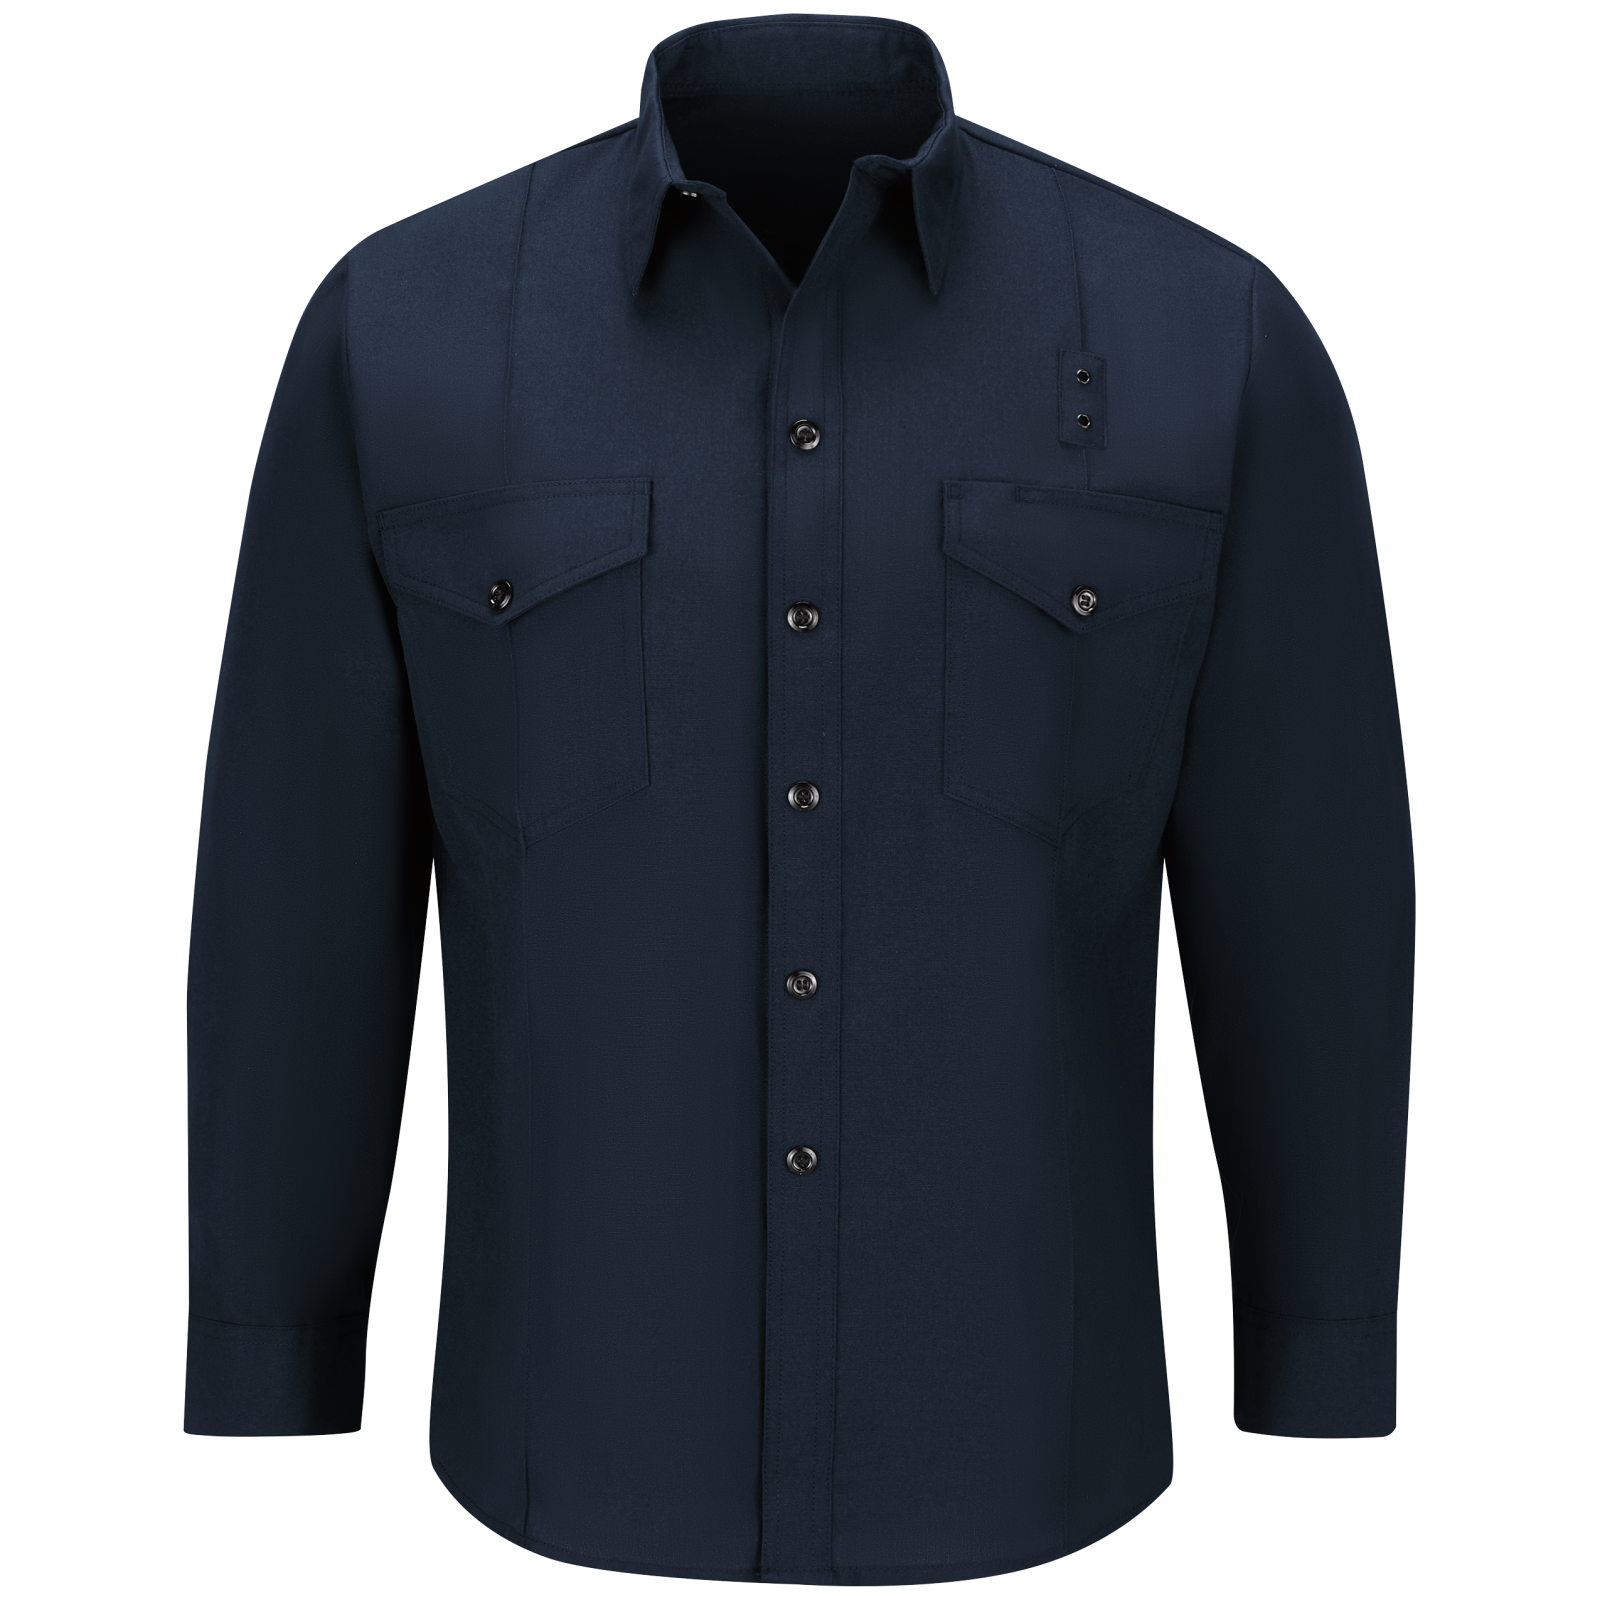 Workrite Classic Long Sleeve Firefighter Shirt (FSF0) | Fire Store | Fuego Fire Center | Firefighter Gear | Made with durable, flame-resistant Nomex® IIIA fabric and autoclaved with our proprietary PerfectPress® process to give you a professional appearance that lasts. Featuring details like lined, banded collars and reinforced stitching, designed to support your needs.